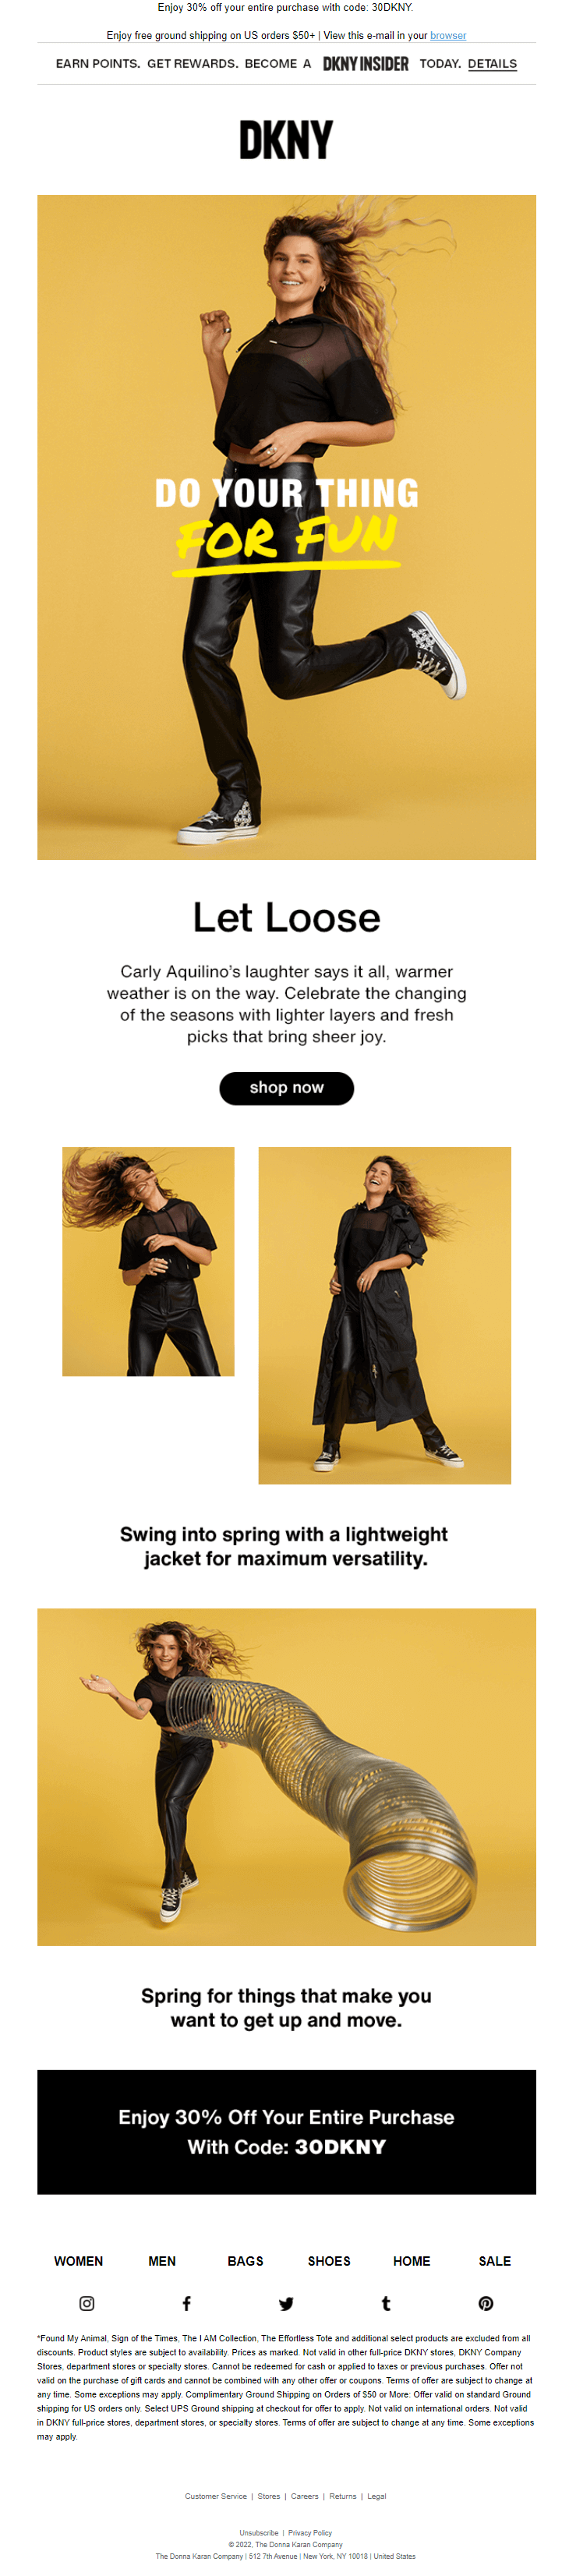 Influencer email from DKNY